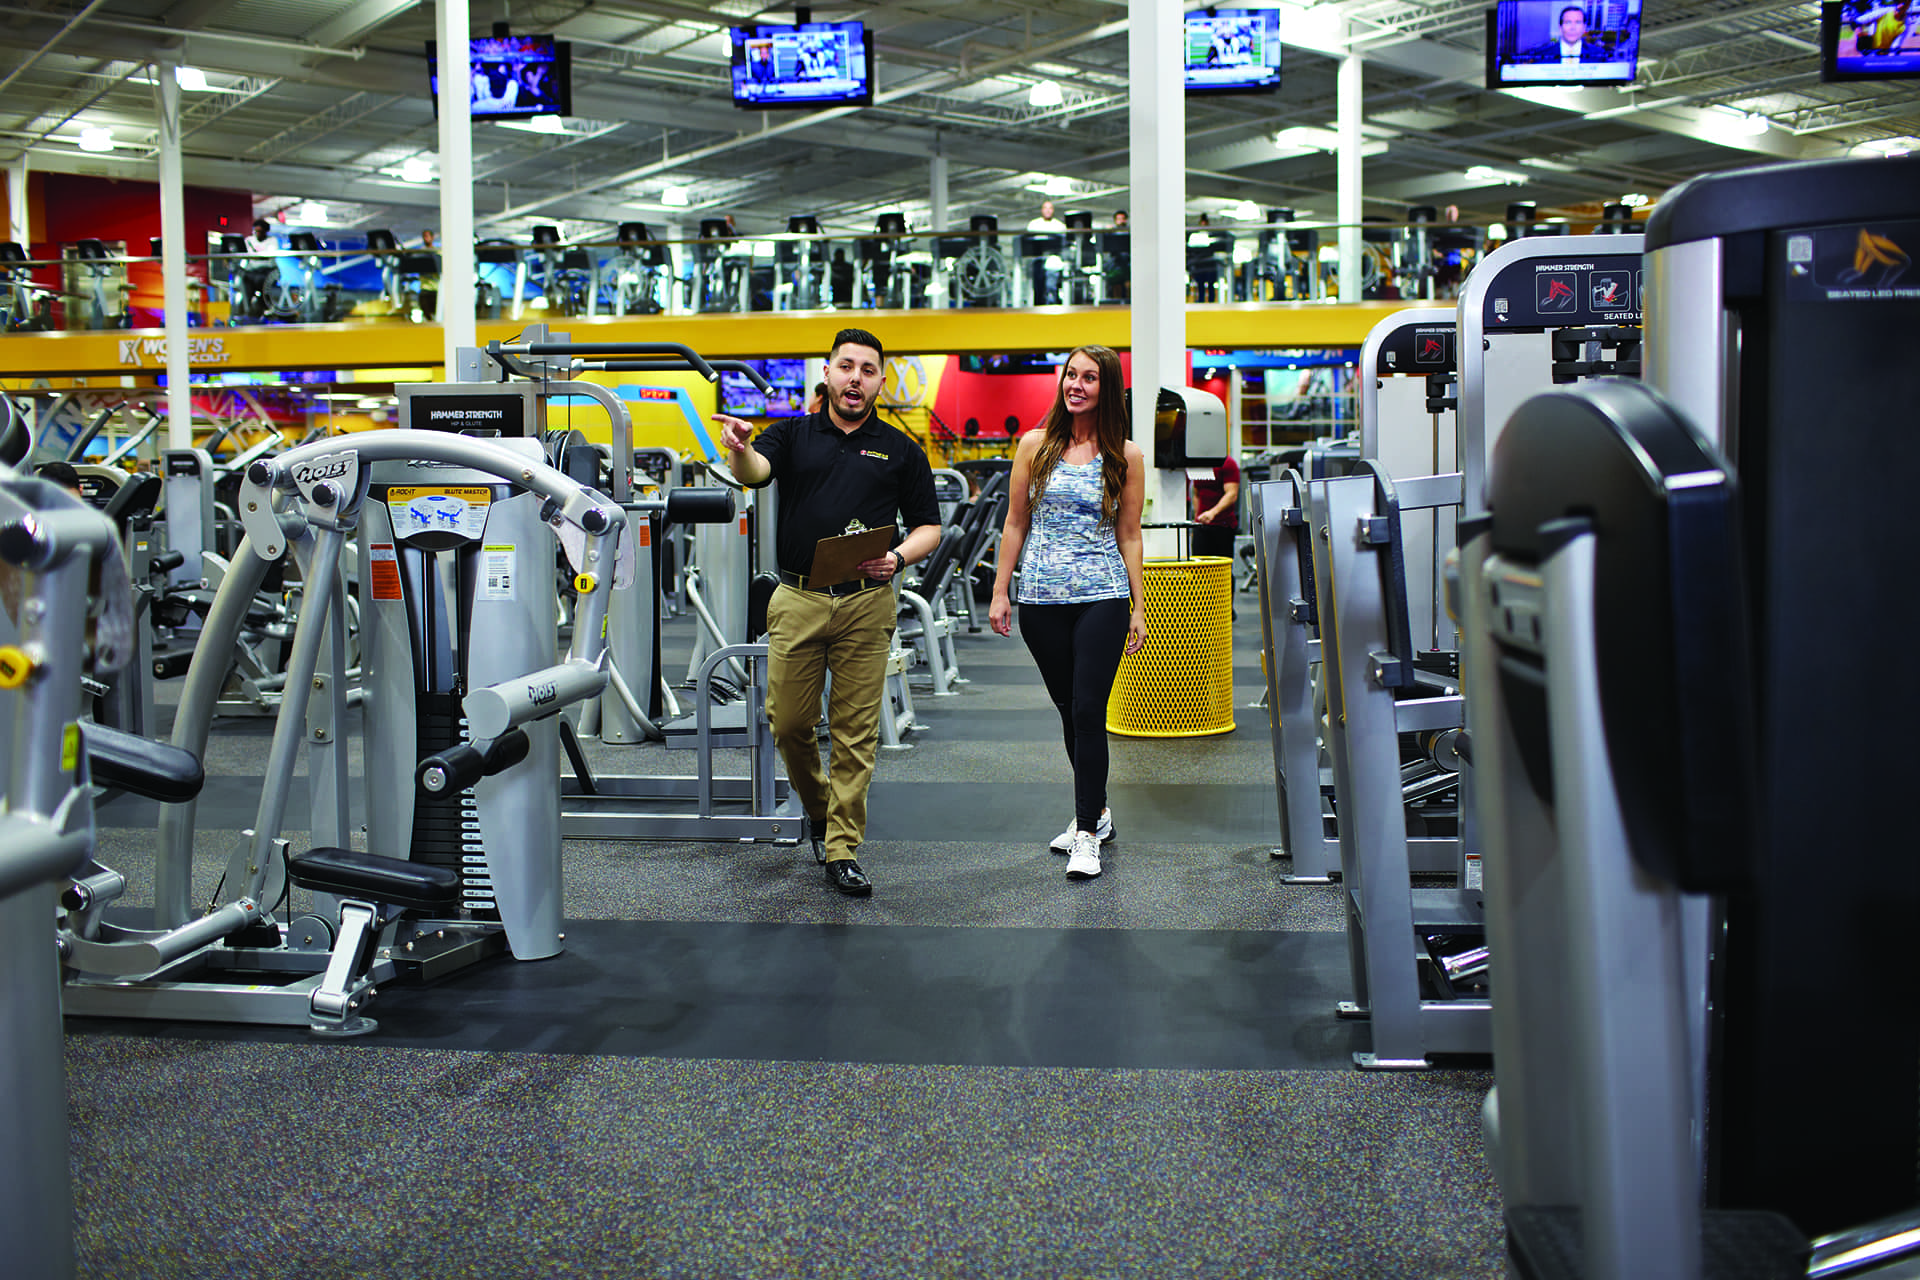 Fitness Connection Prices 2022 Update - Gym Membership Fees